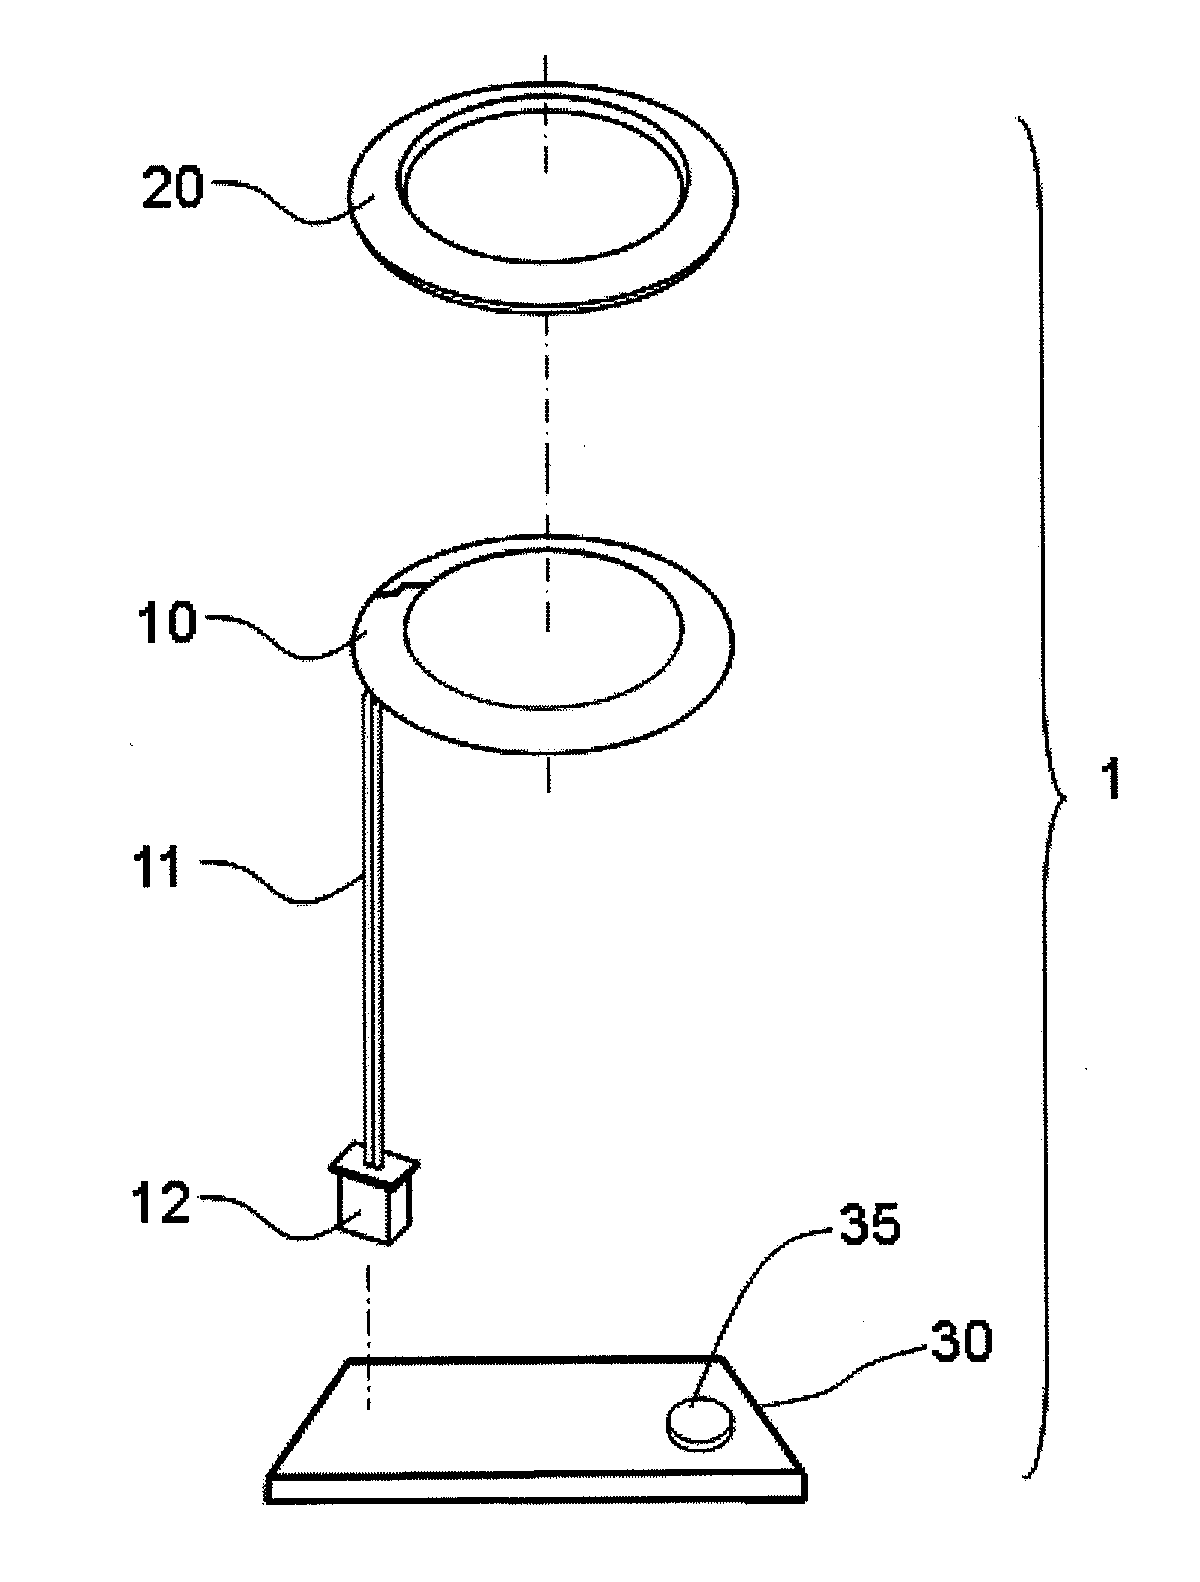 Defogging and defrosting device for protective lens of a camera